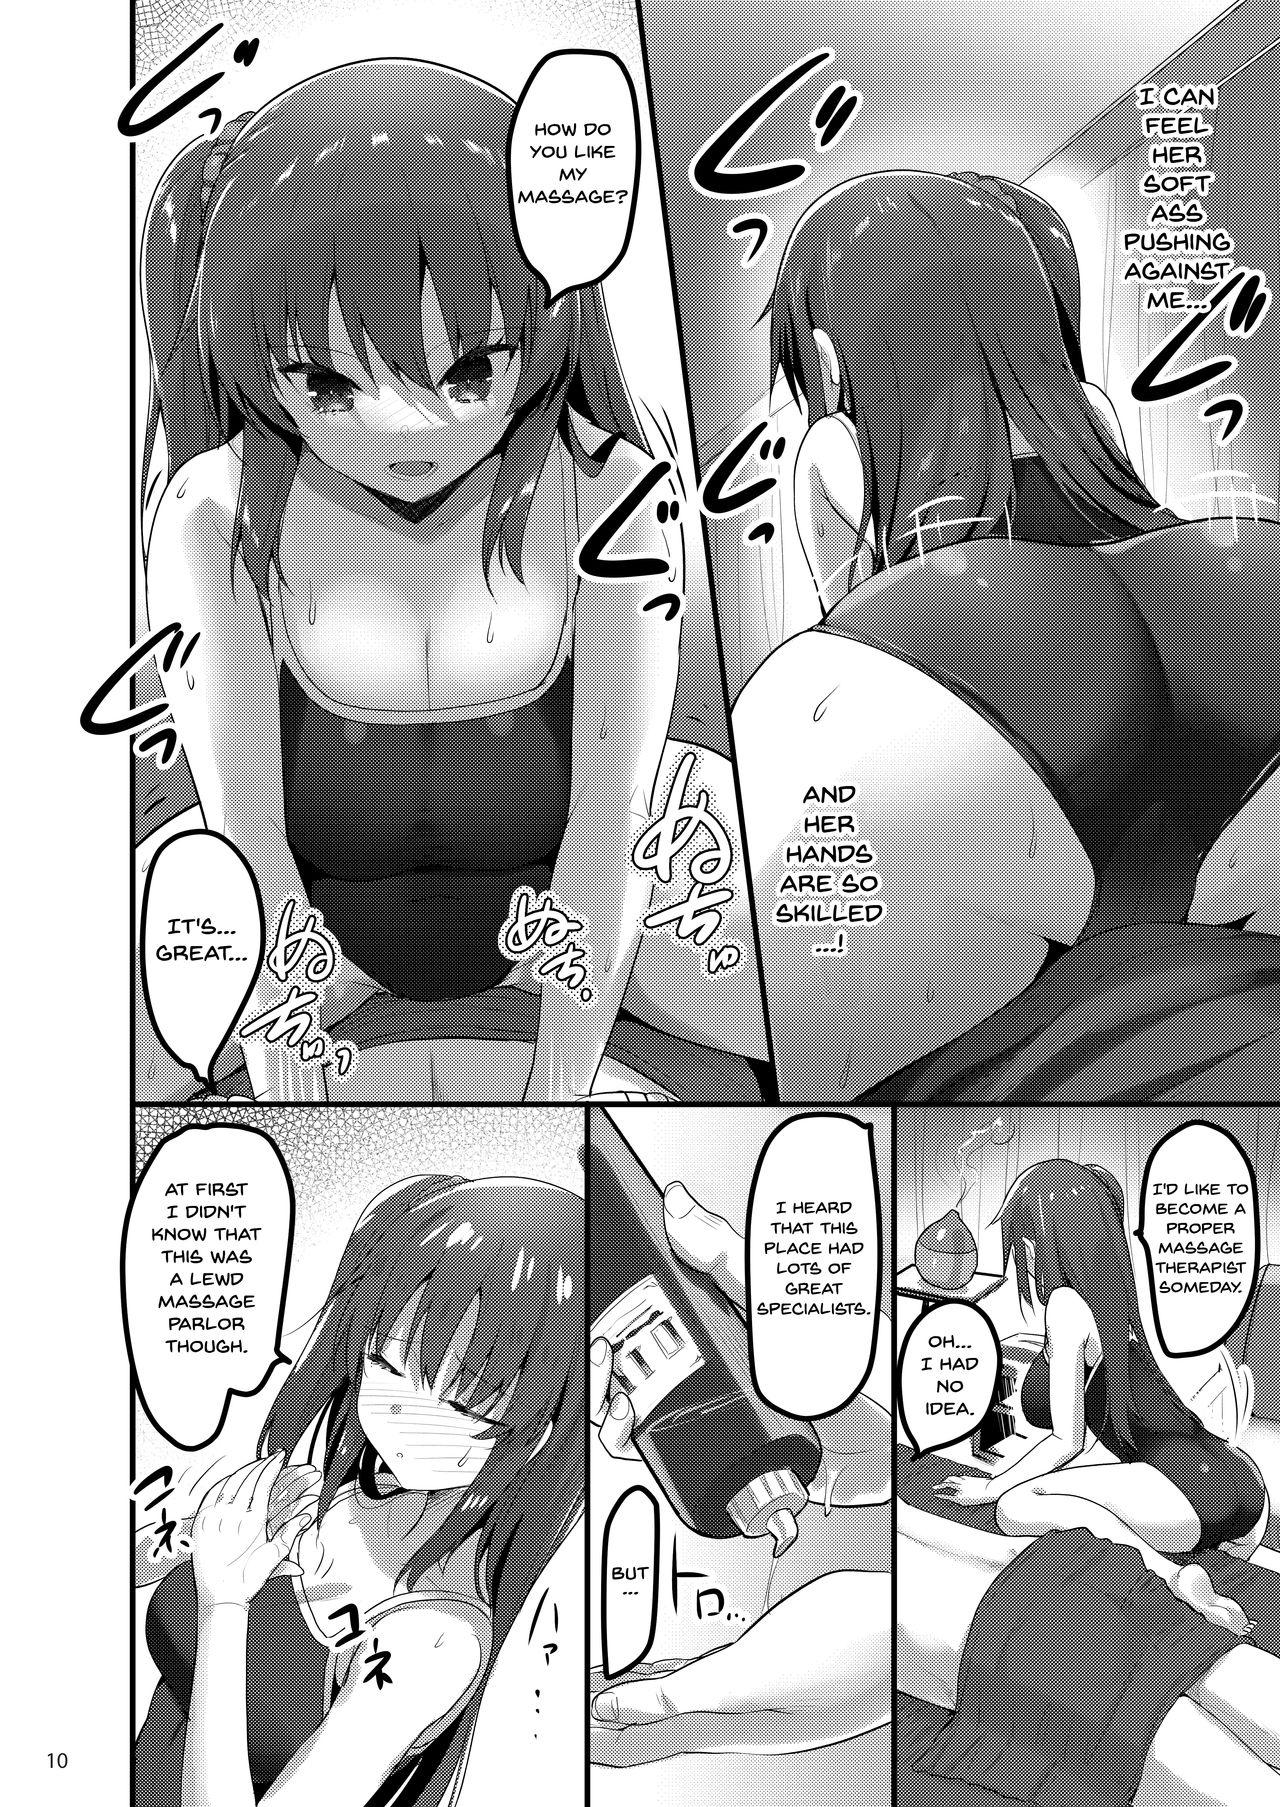 Facefuck Ecchi na Massage-ya ni Kitara Classmate ga Dete Kita Hanashi | A Story Of Going Out To Get a Massage And The One Who Shows Up Is My Classmate - Original Rough Sex - Page 9